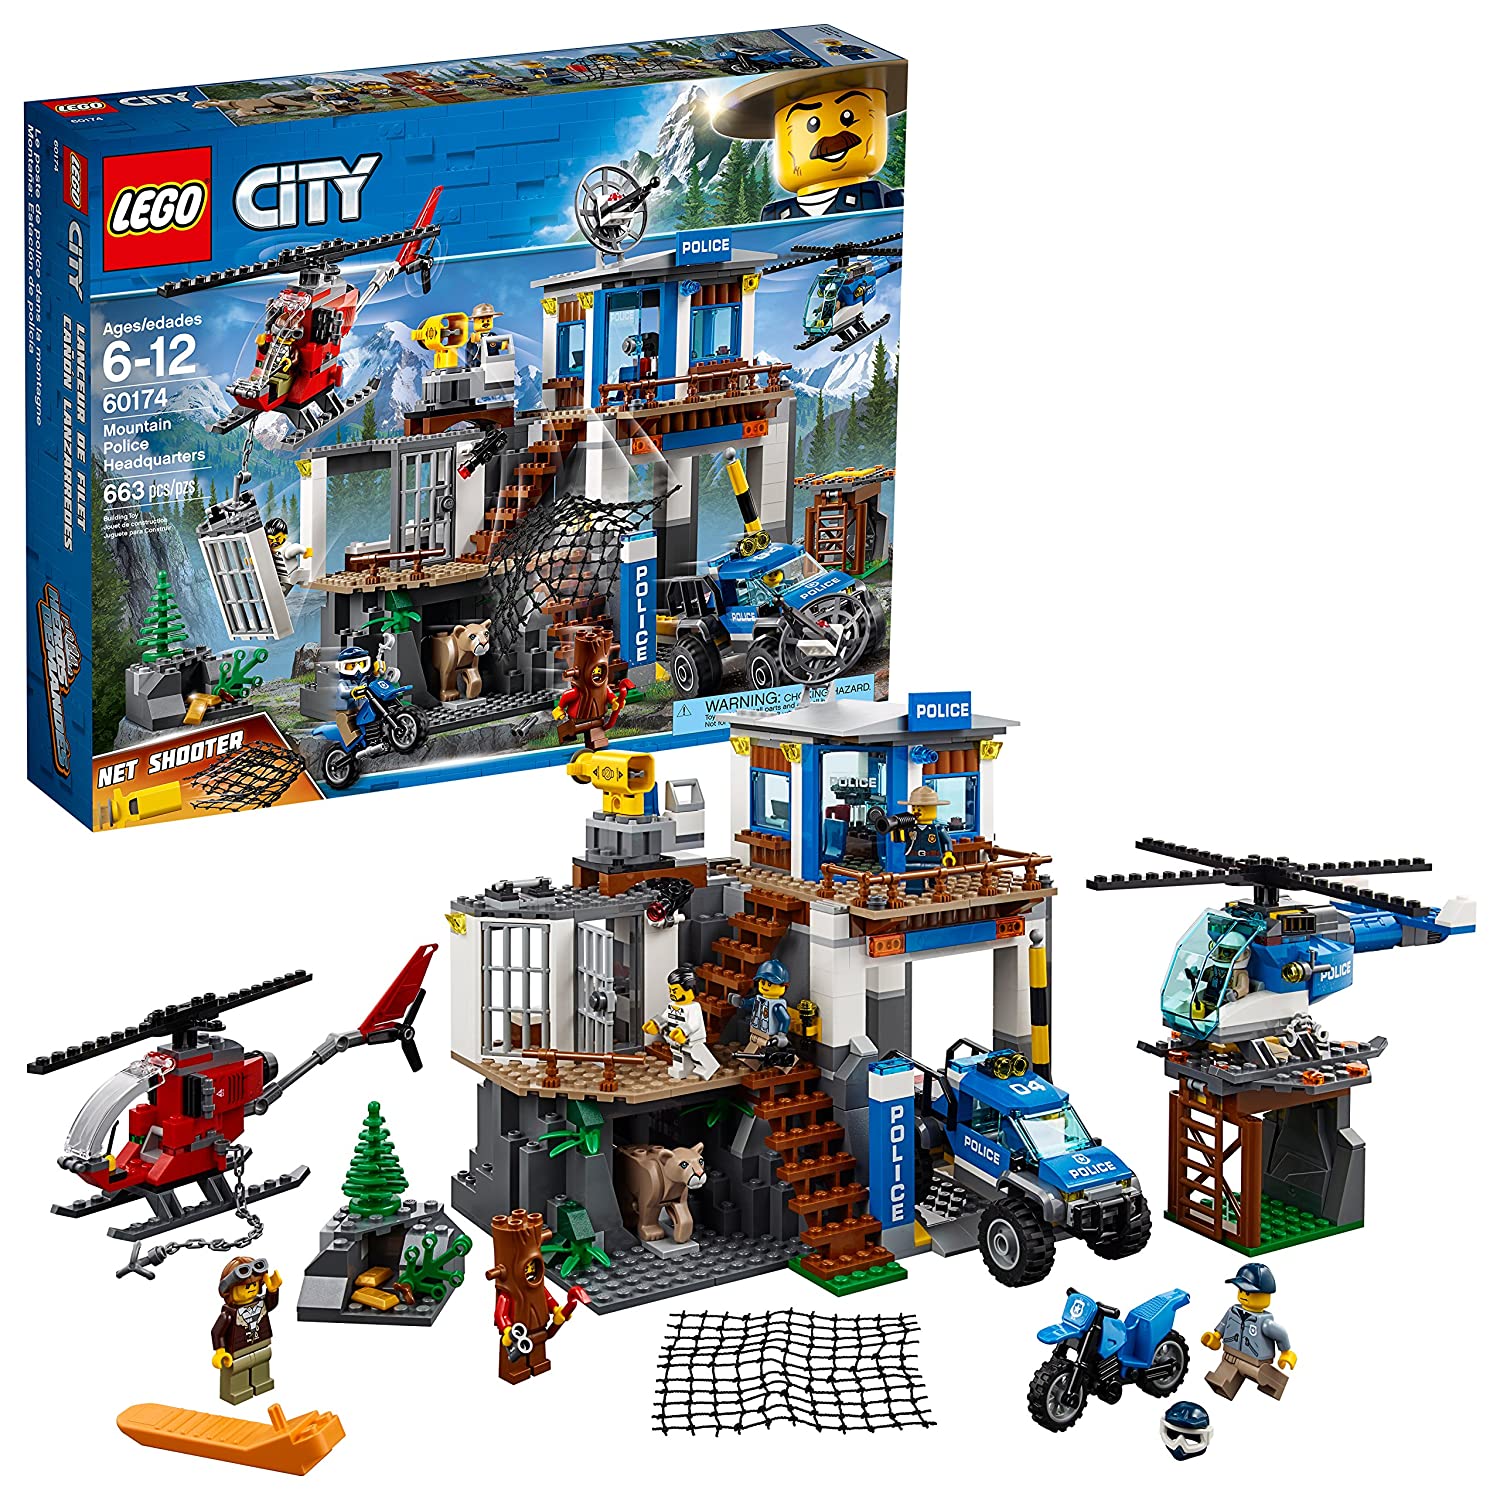 9 Best LEGO Police Station Set 2022 - Buying Guide & Reviews 2